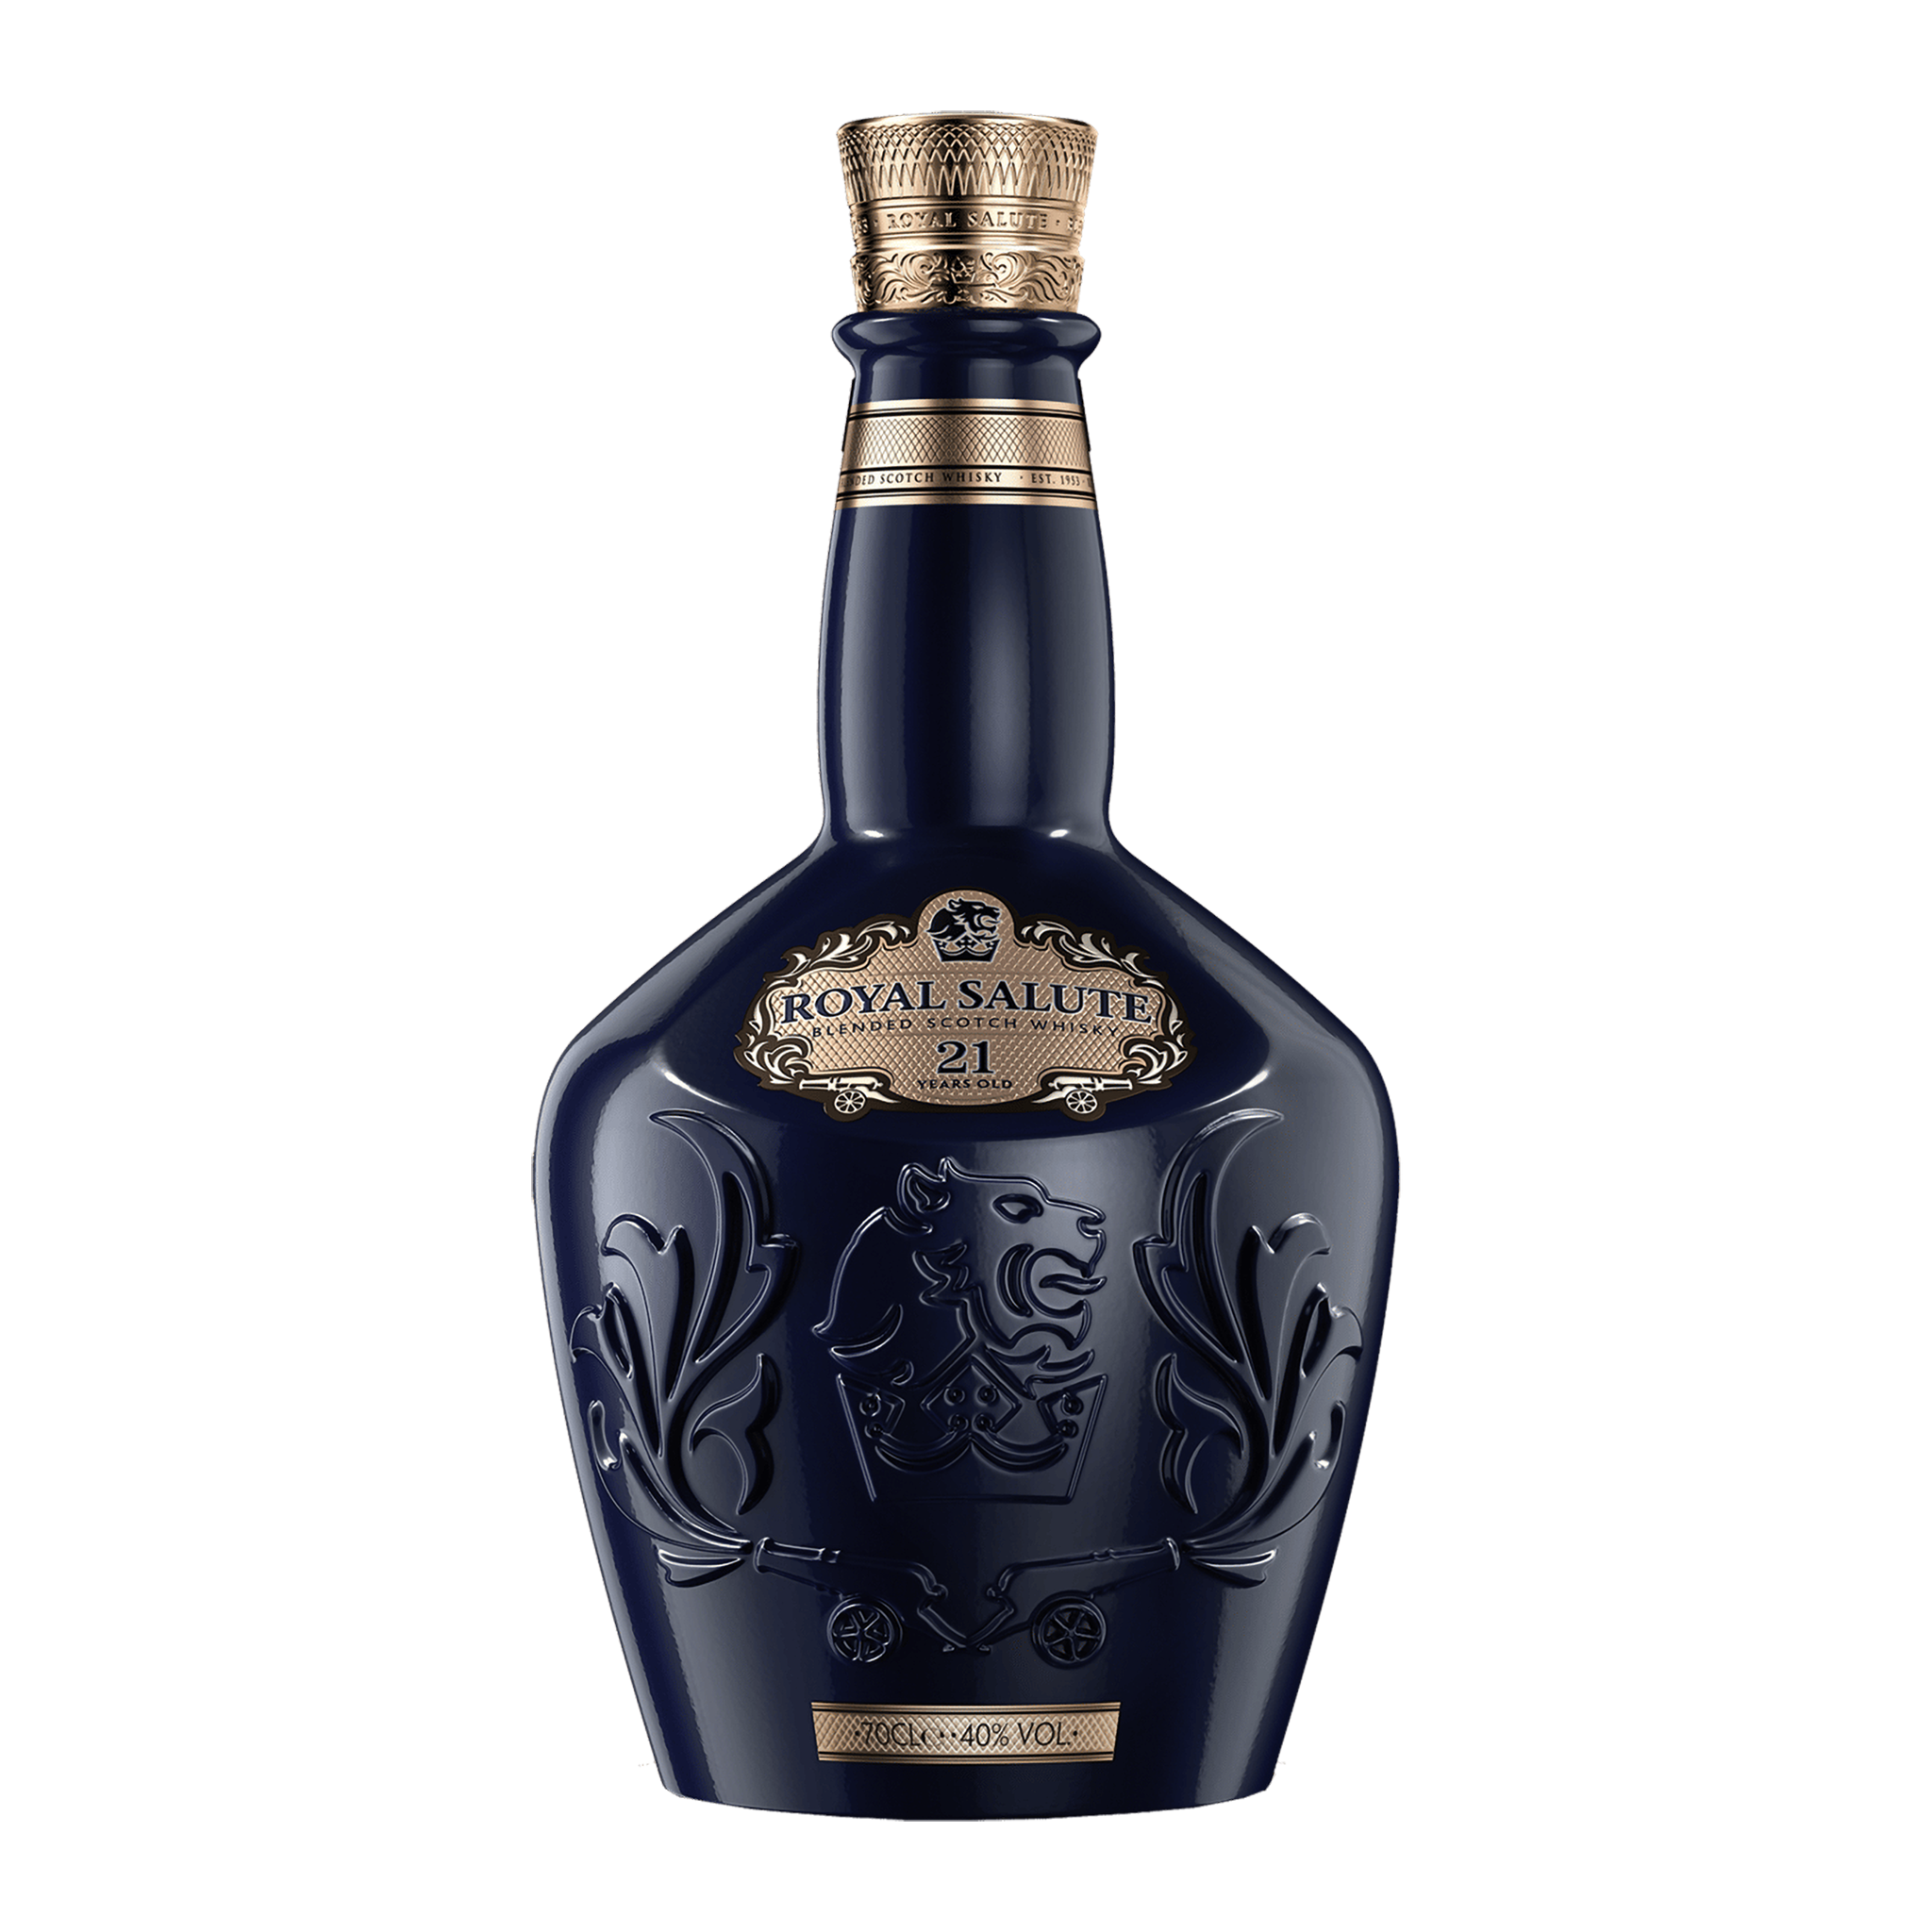 Chivas Royal Salute 21 Year Old Blended Scotch Whisky 700ml